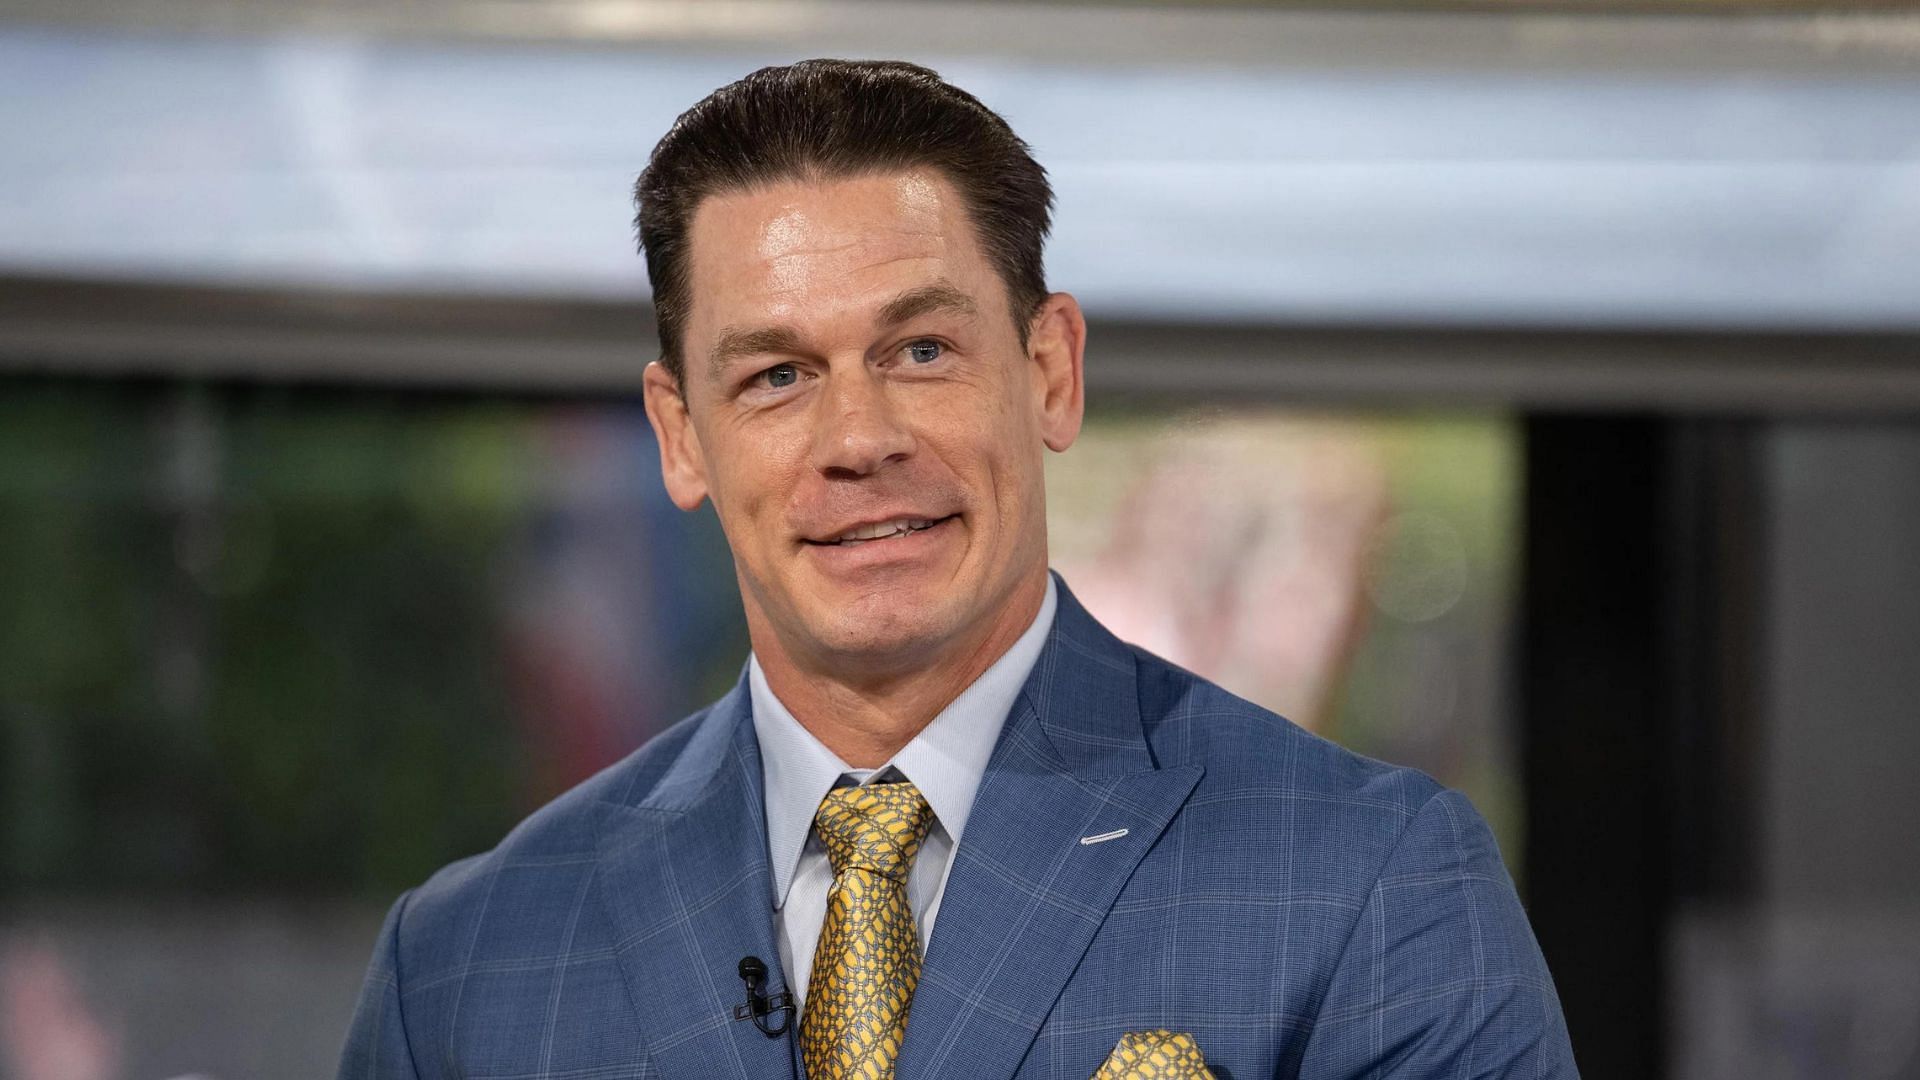 John Cena spills beans on contemplating NFL career during his NCAA Division III days